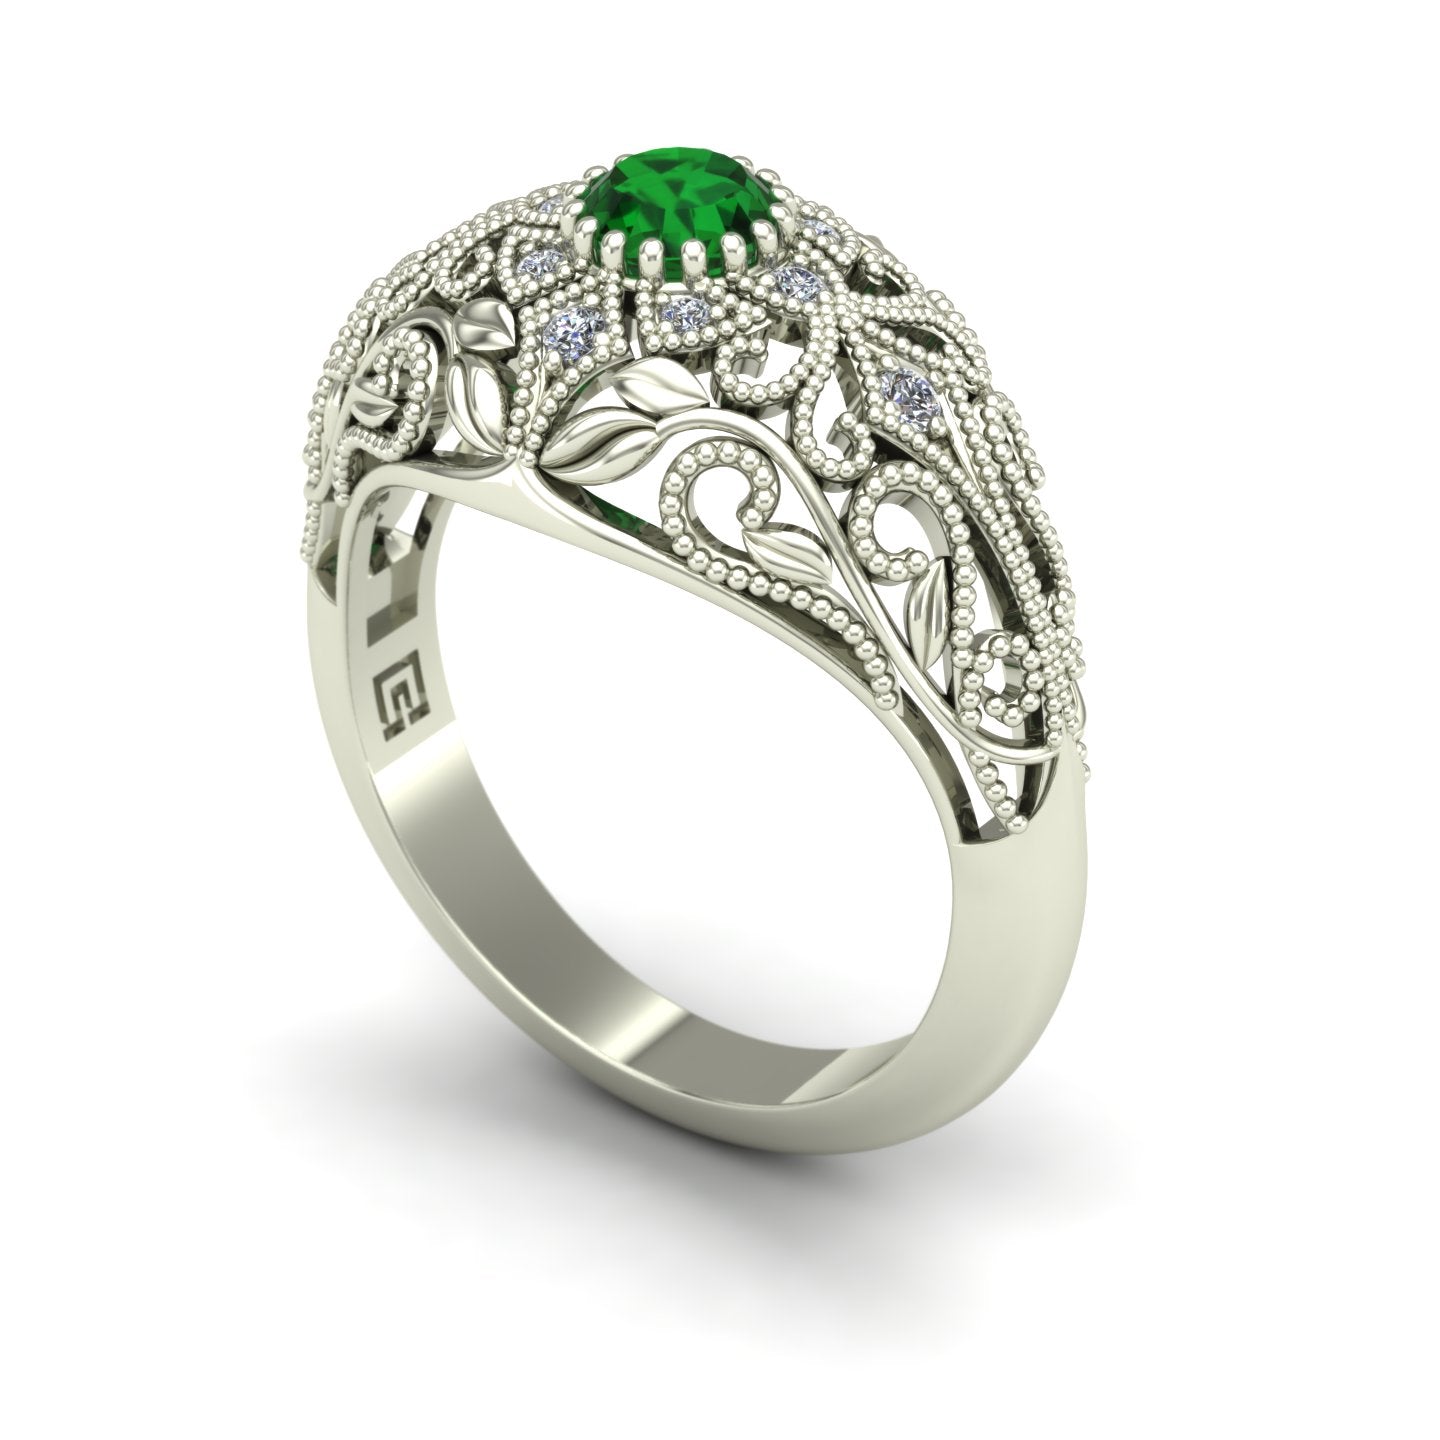 Emerald and diamond dome ring with leaves and vines in 14k white gold - Charles Babb Designs